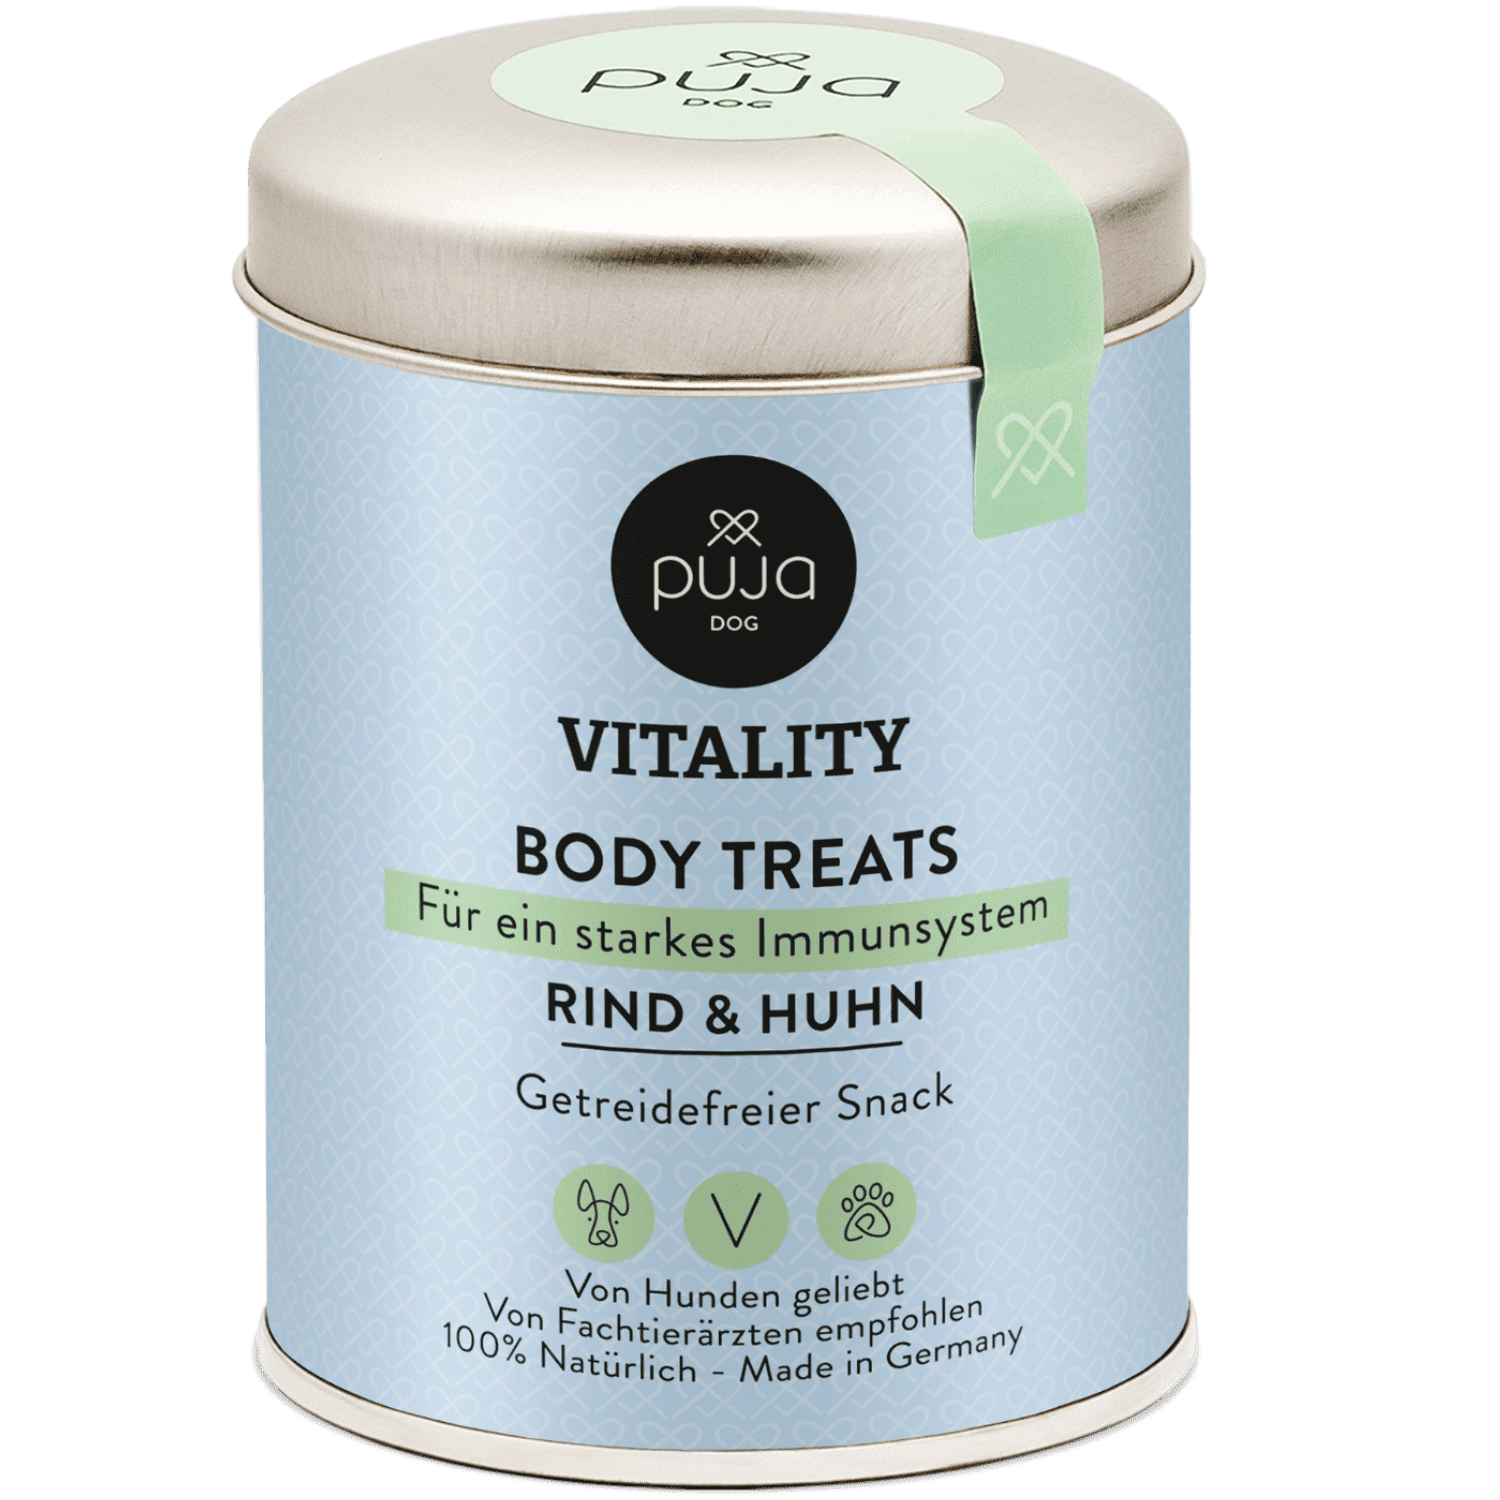 Vitality Body Treats for dogs - delicious immune system booster 150g